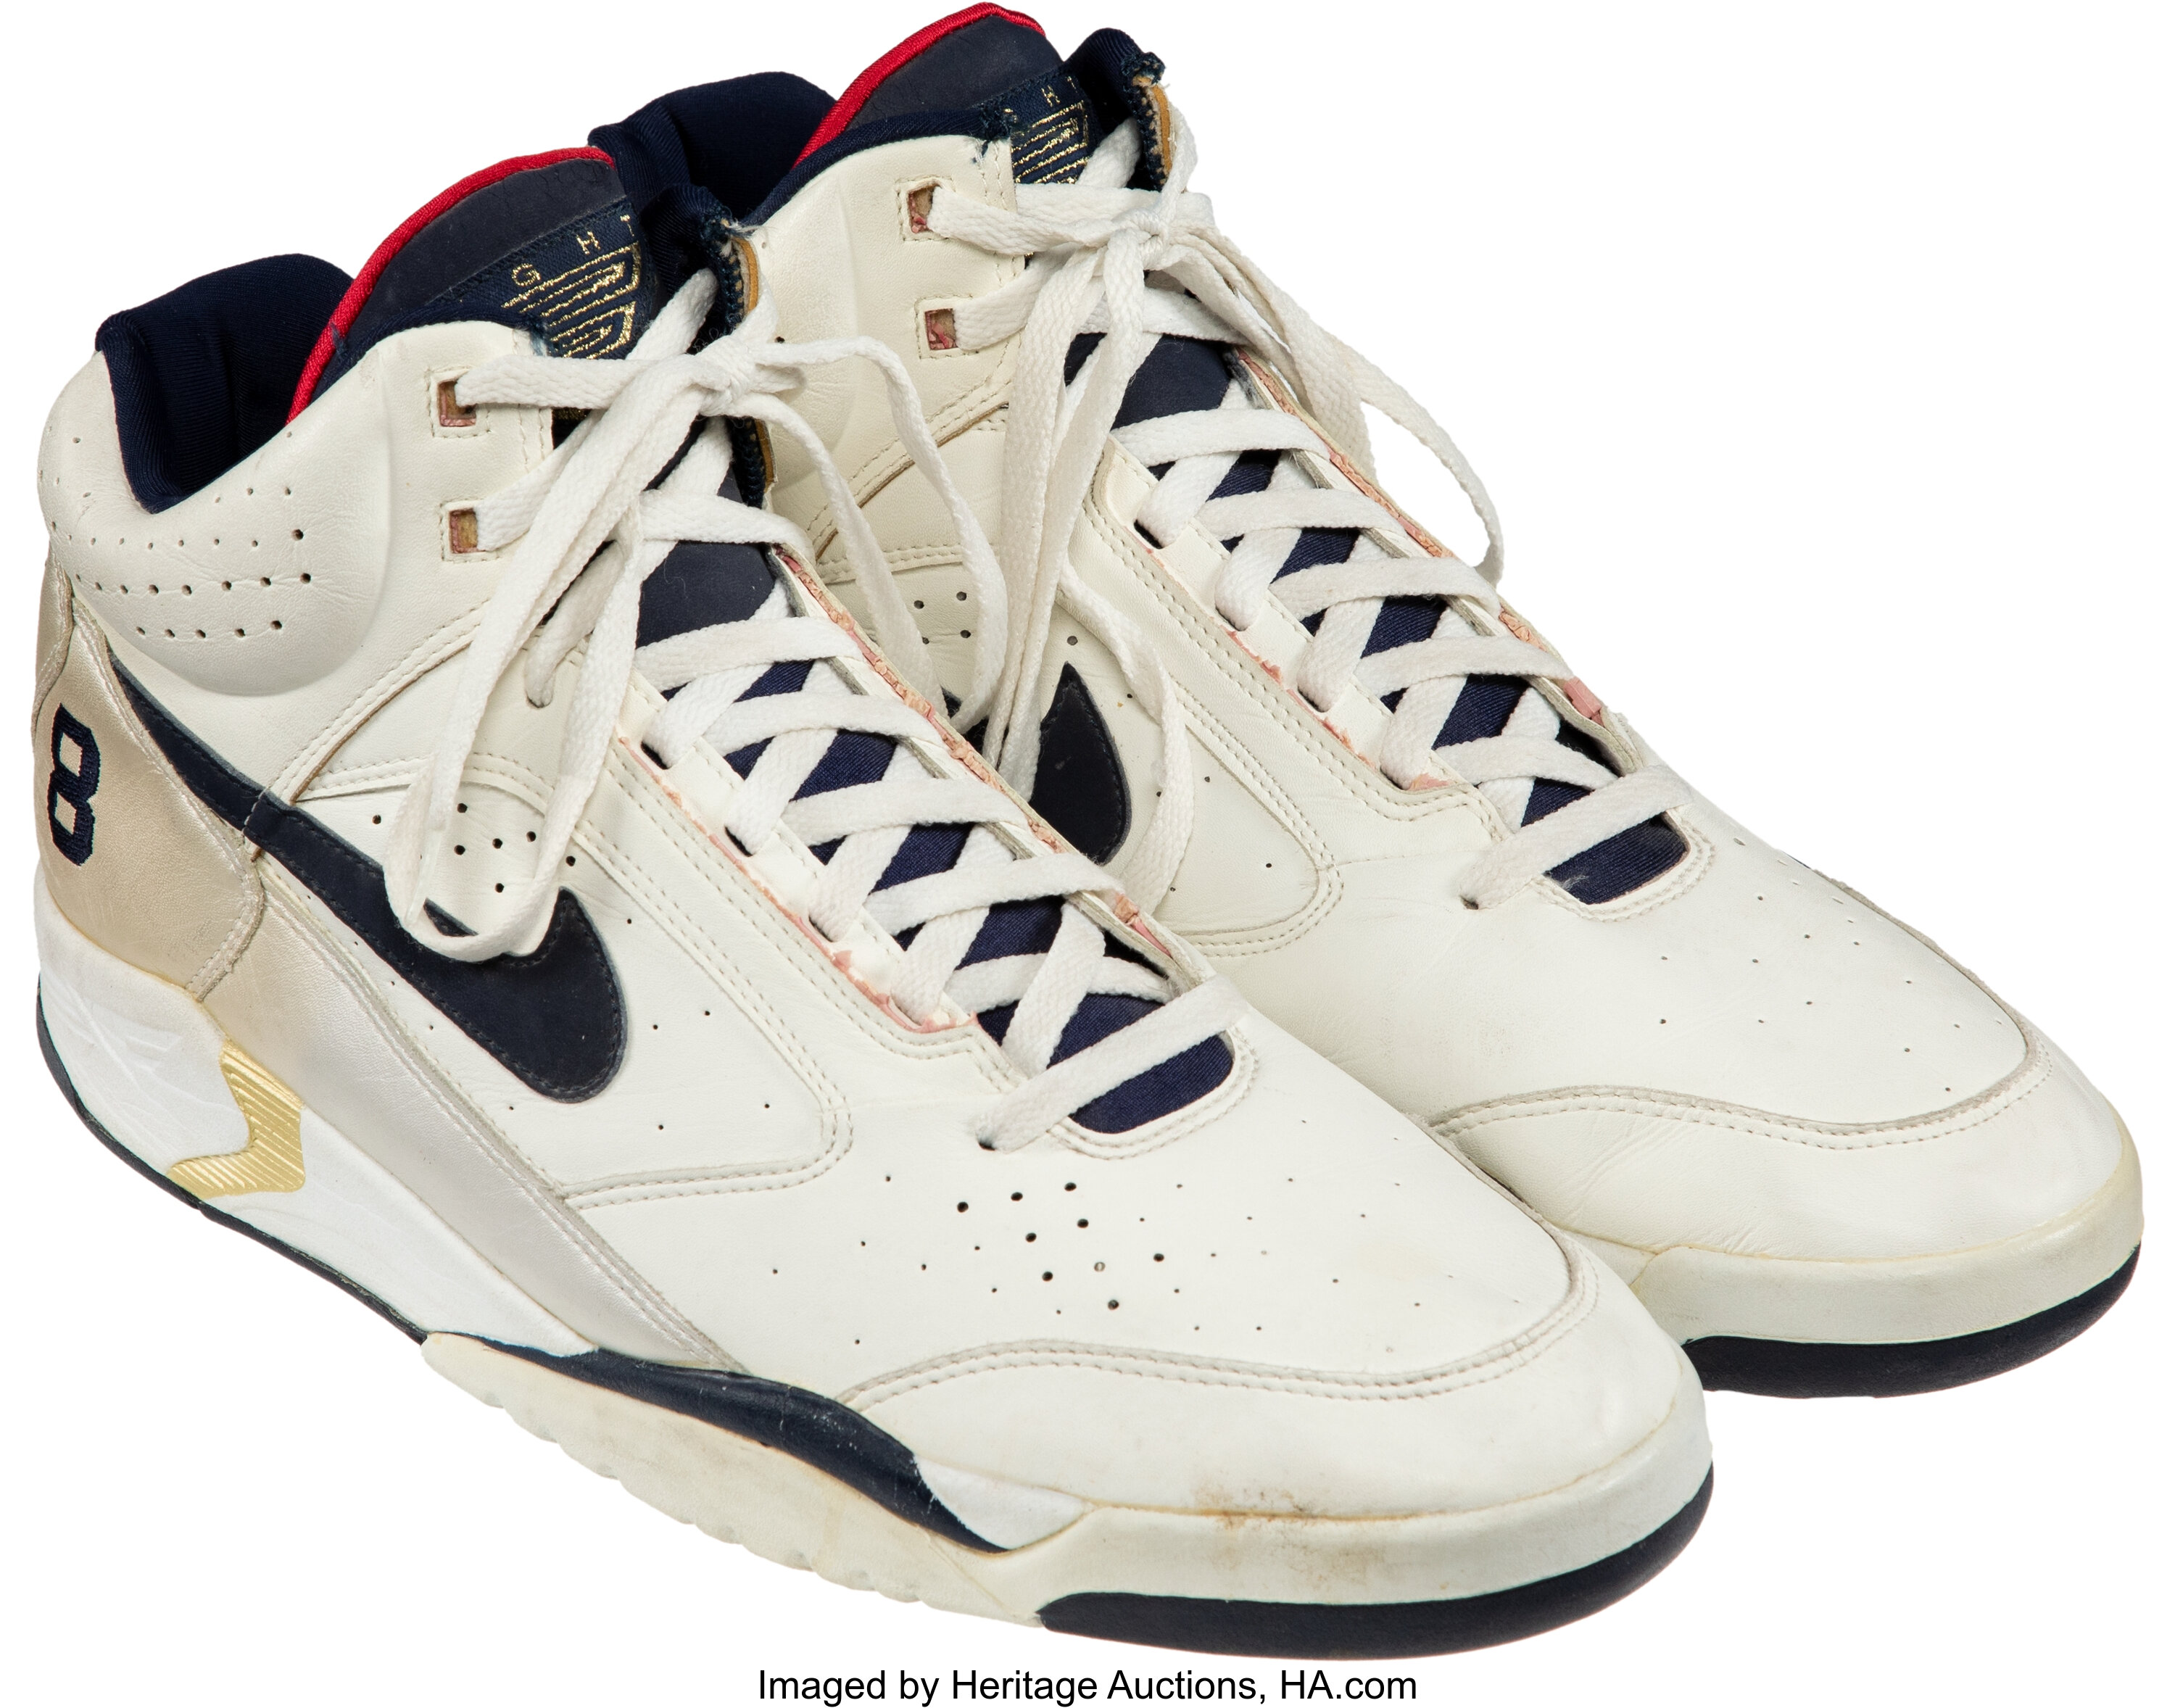 1992 Scottie Pippen Dream Team Worn Signed "Nike Air Lite" Lot #82188 | Heritage Auctions